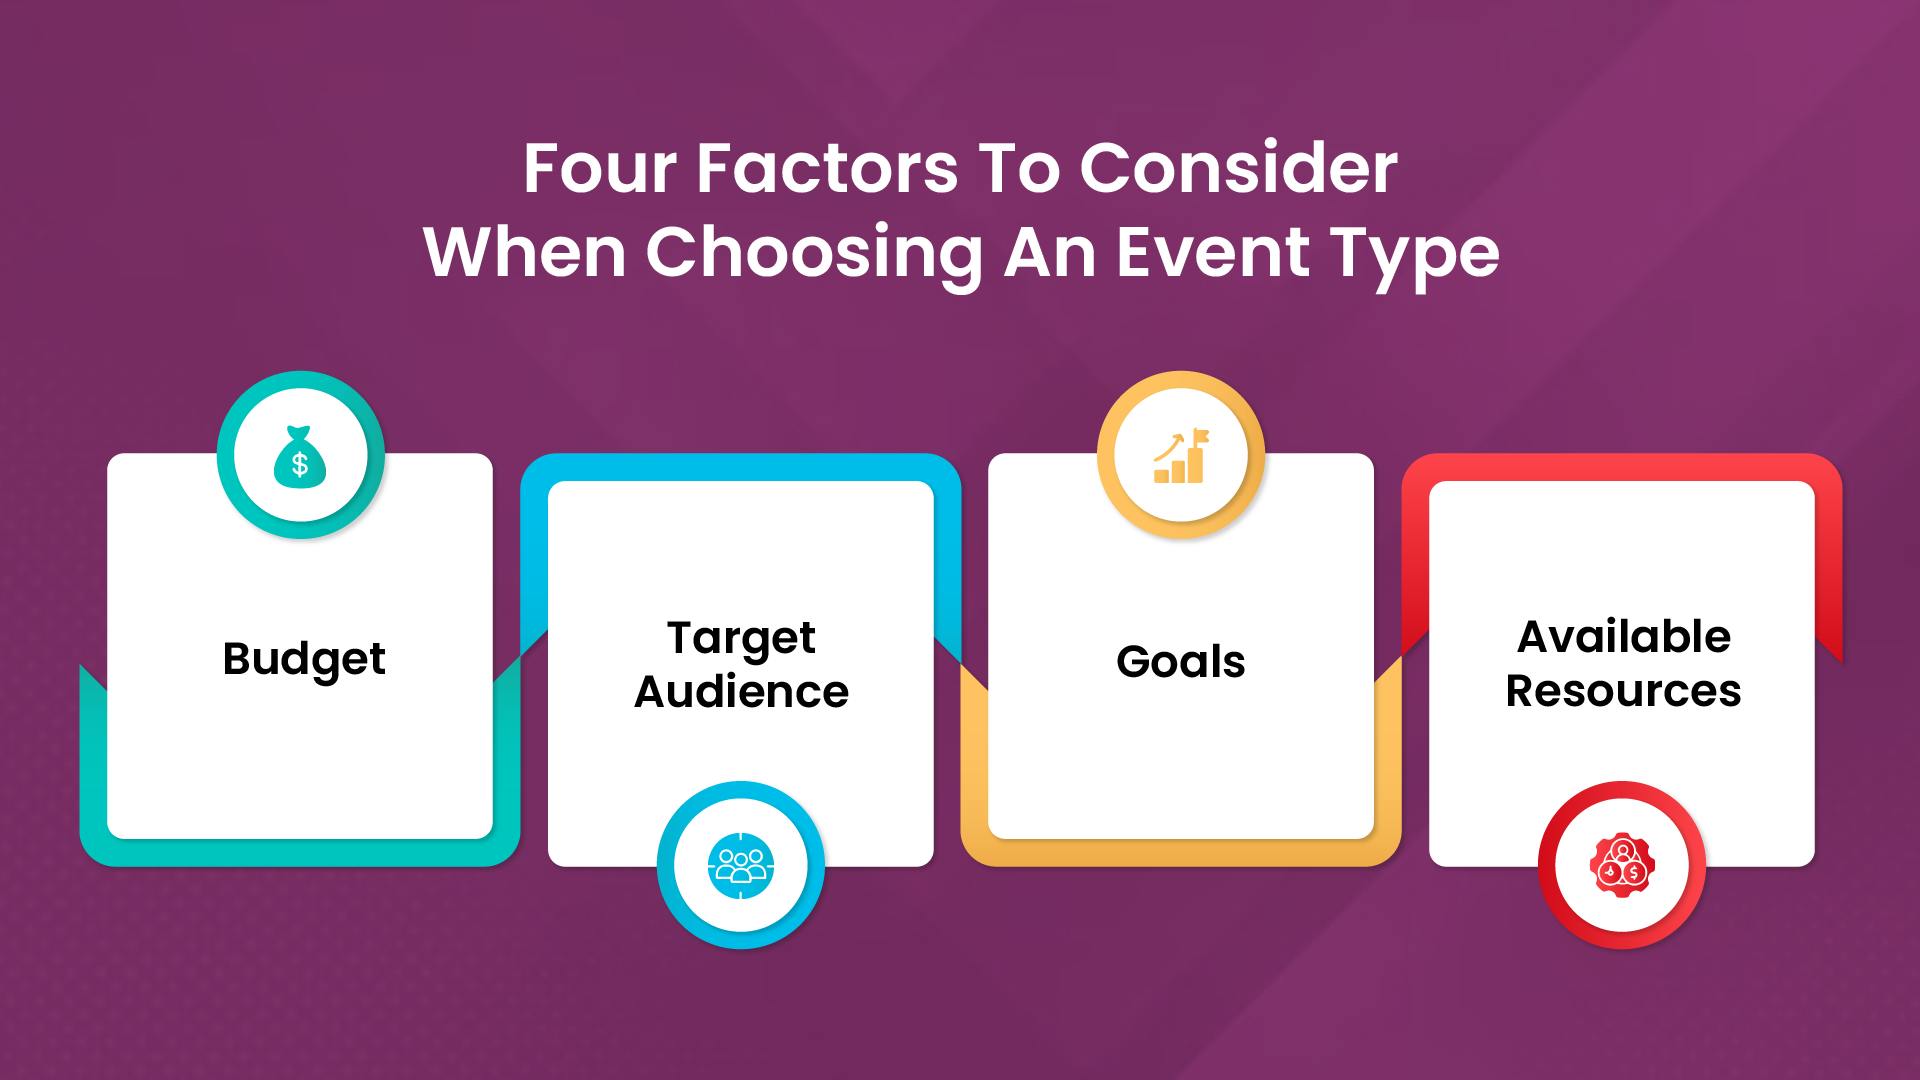 Factors to consider when choosing an event type